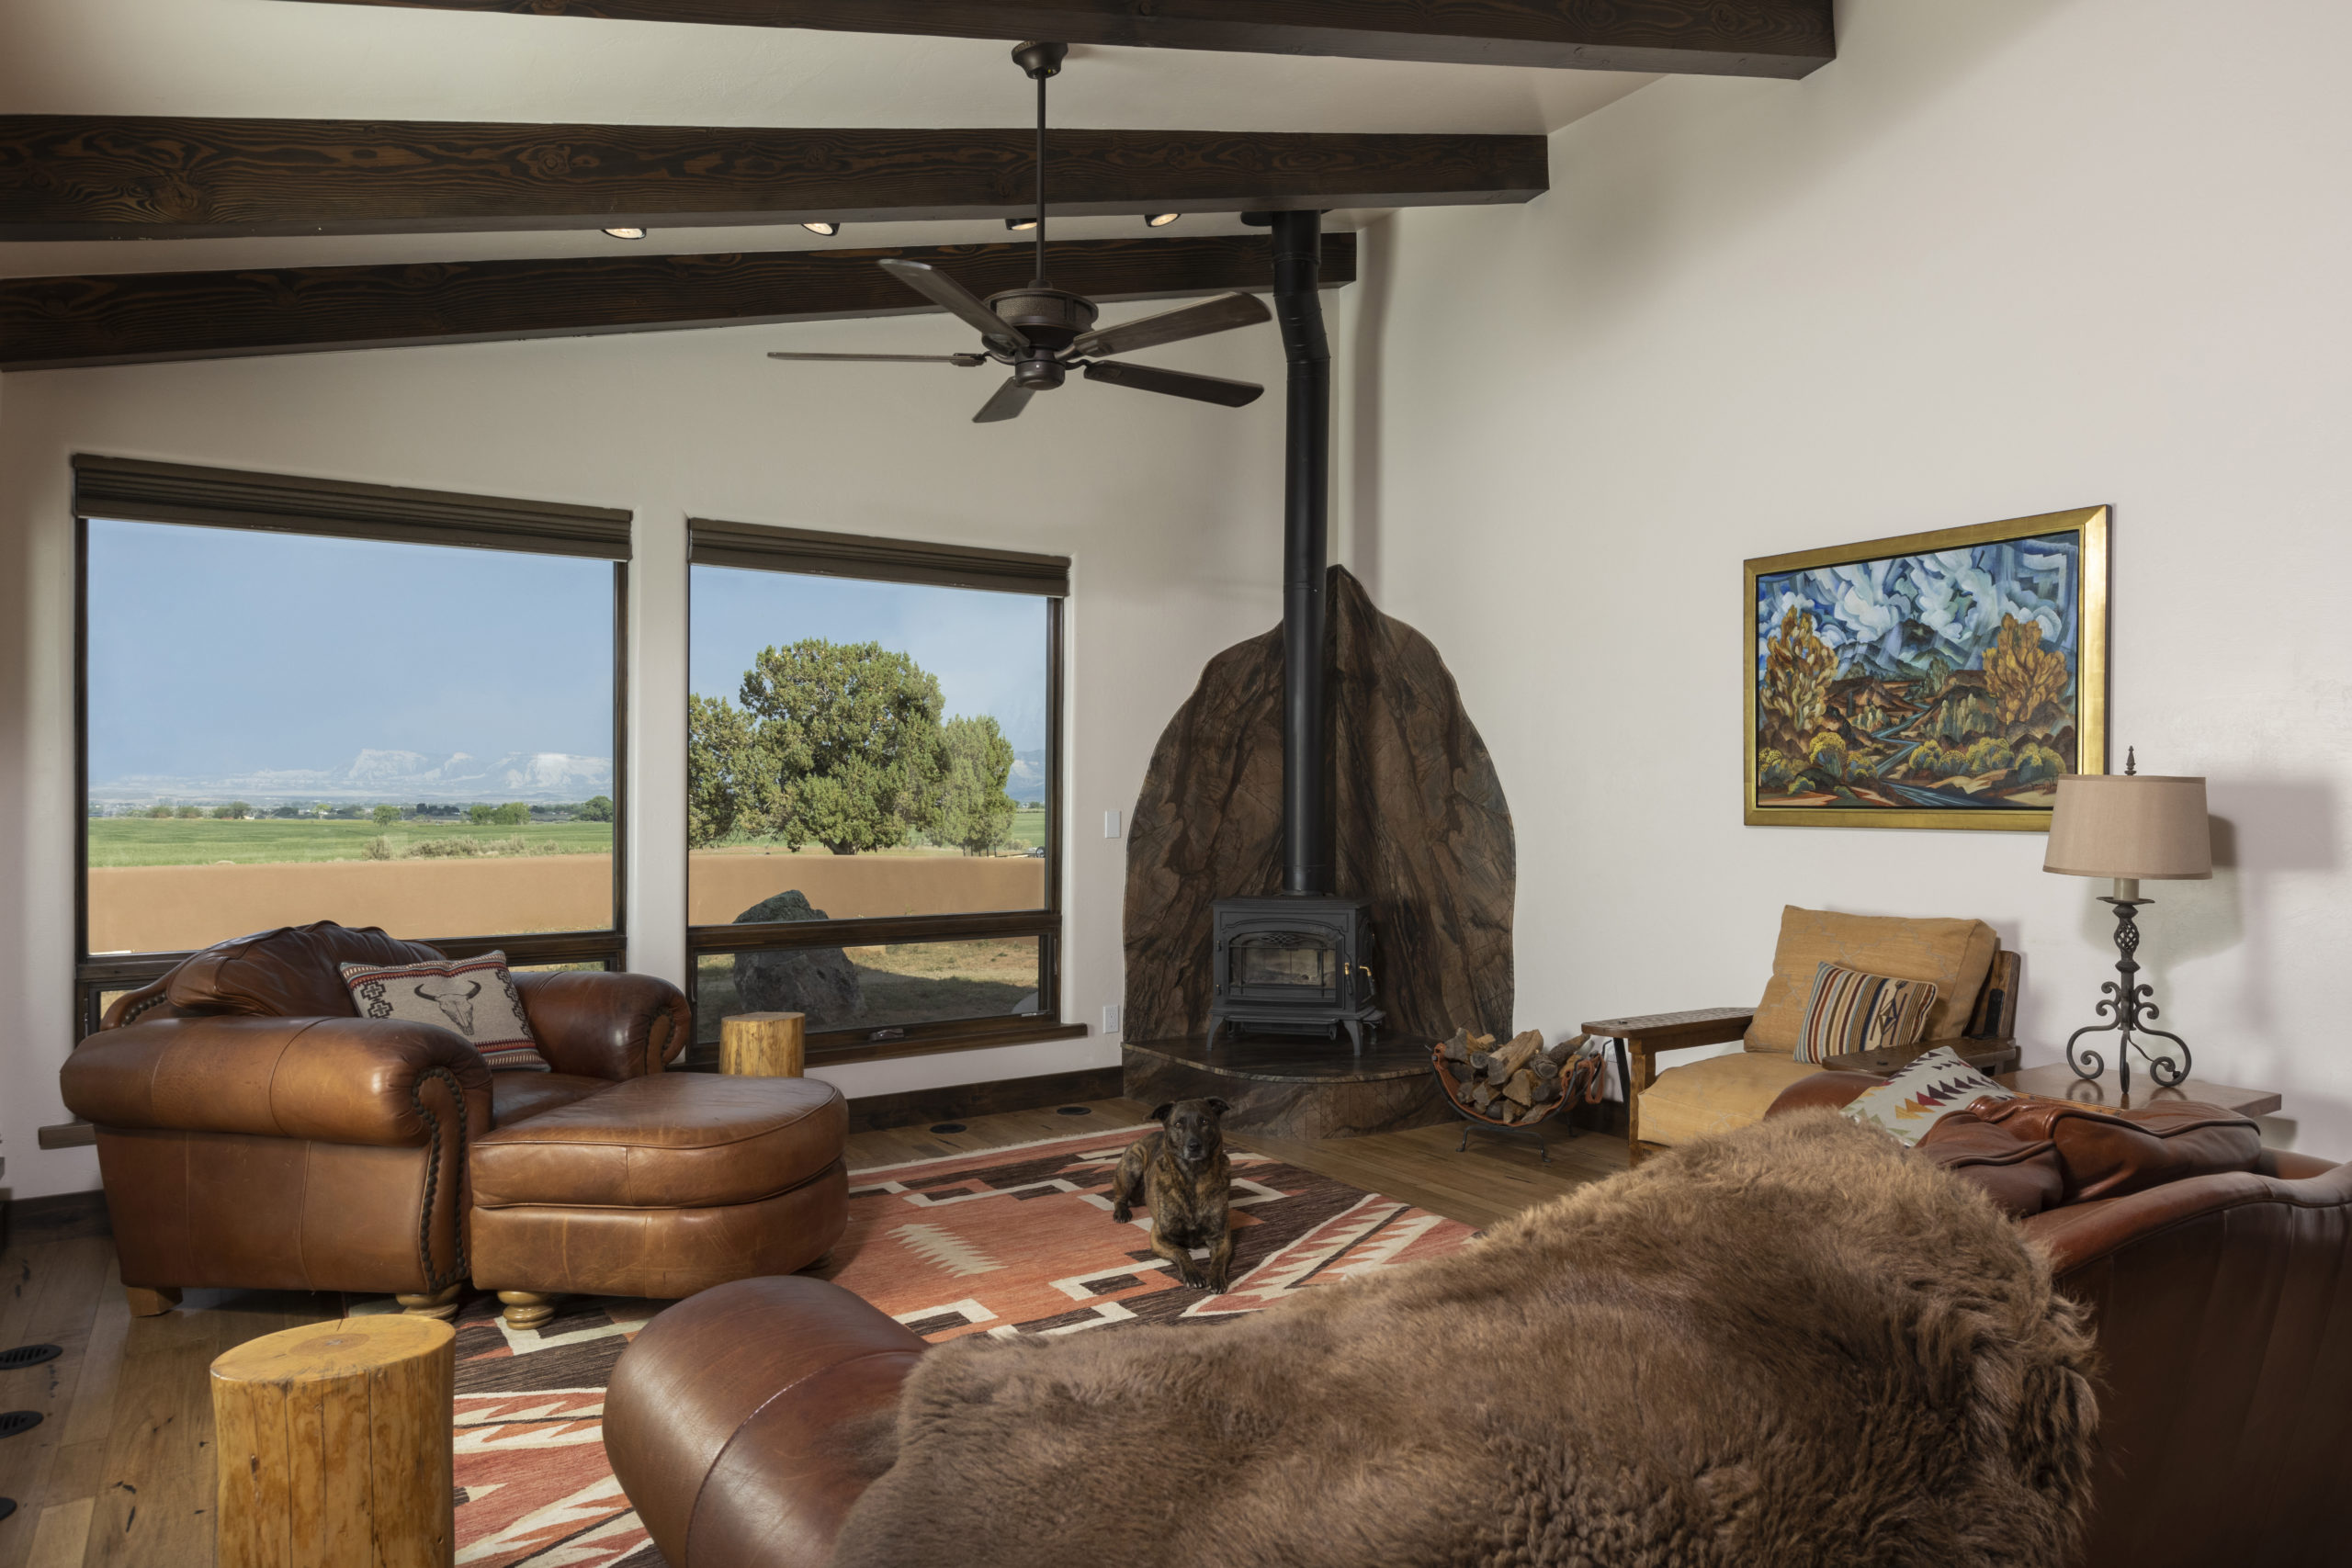 Living room with mountain views and custom stone fireplace surround, wood burning stove